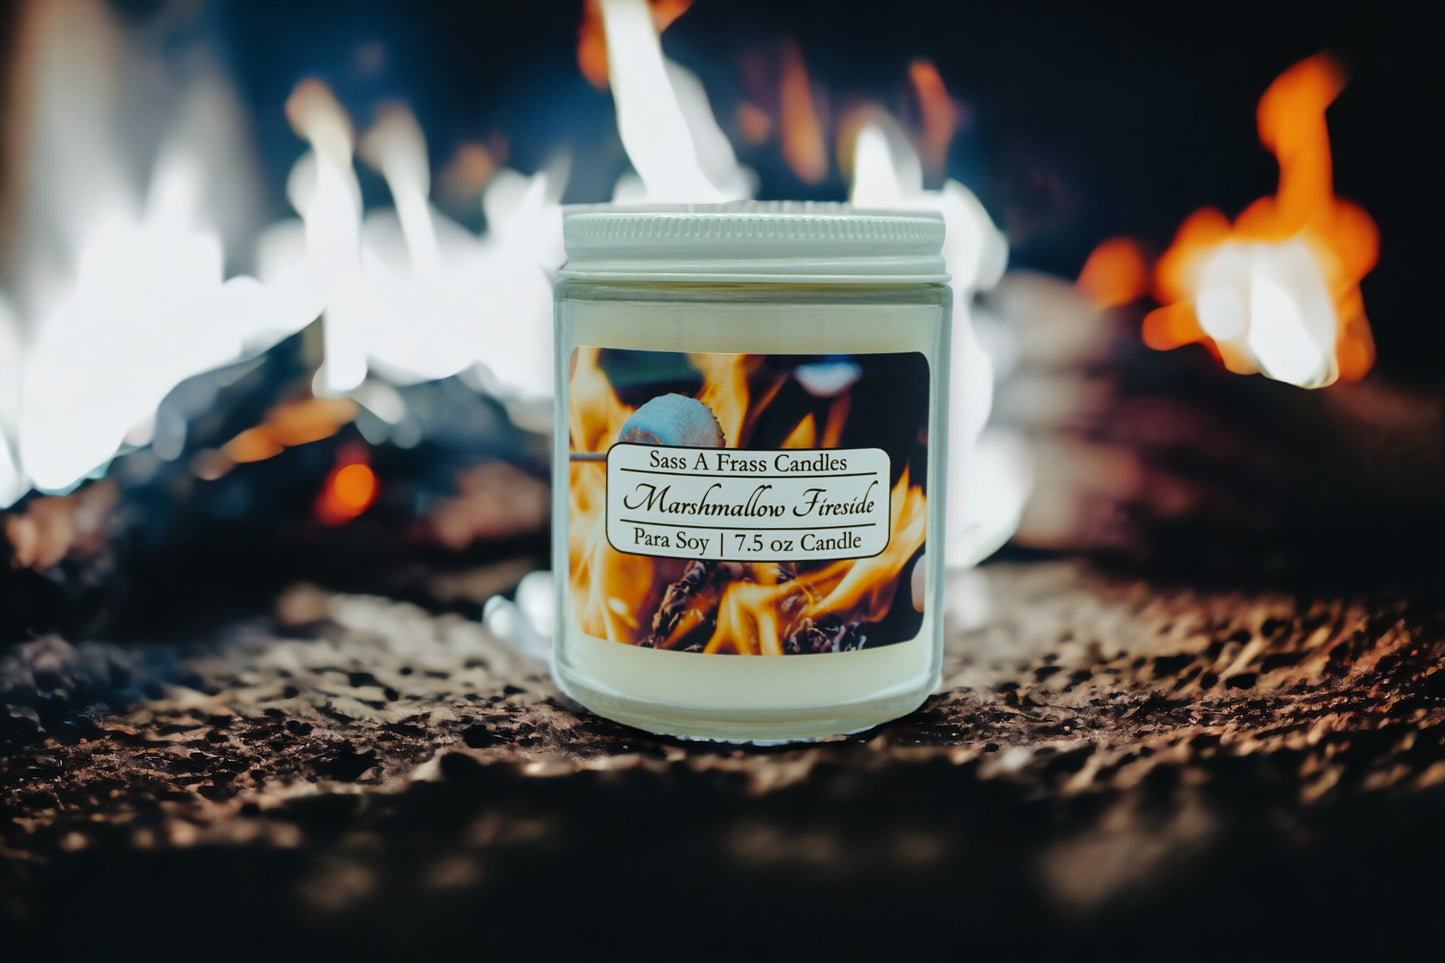 Marshmallow Fireside 7.5 oz Candle